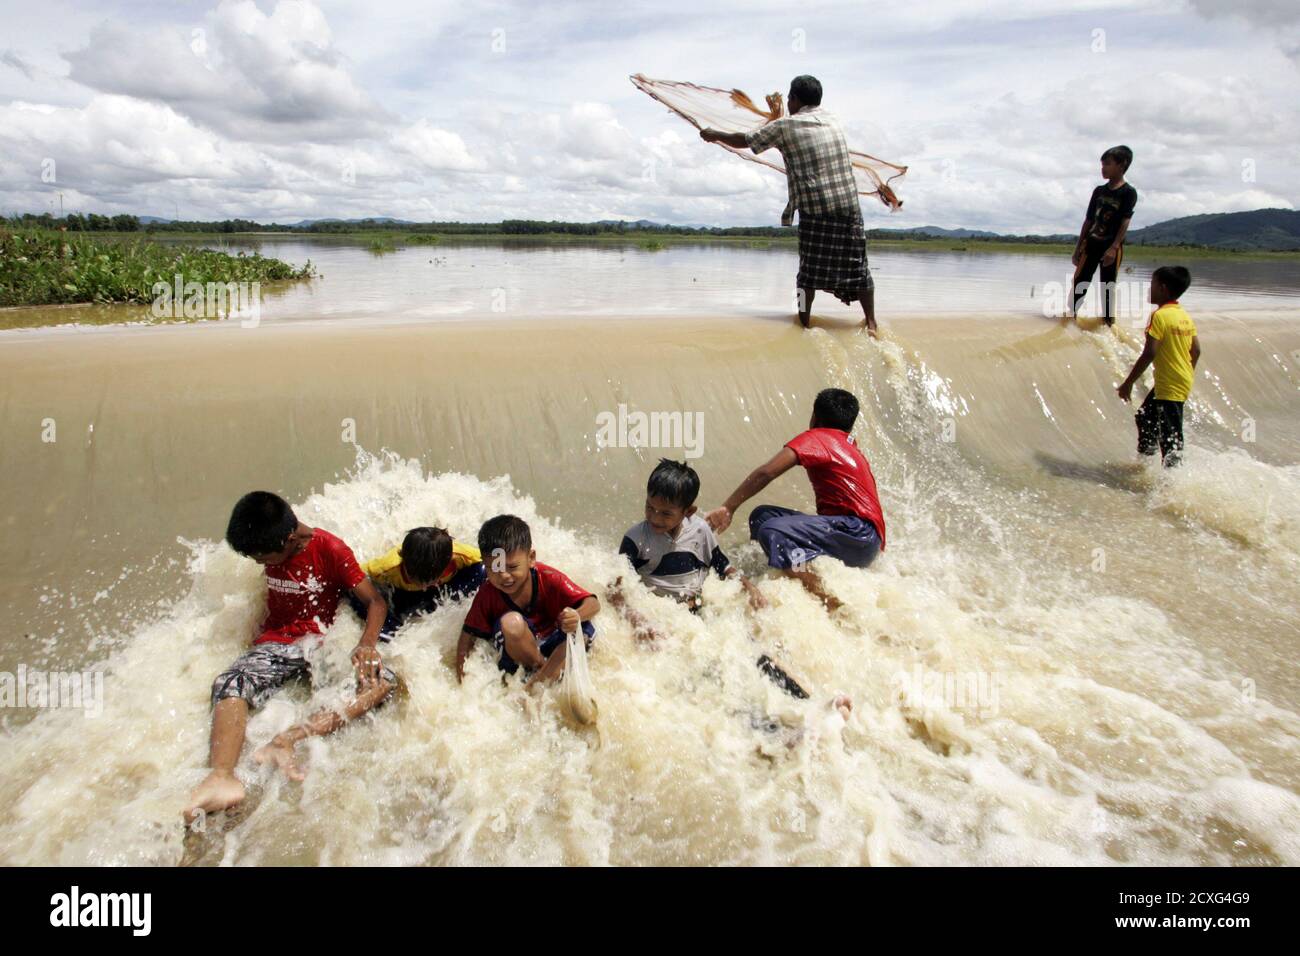 Children play in flood water as a man casts his fishing net in an area  affected by floods in Thailand's southern Pattani province November 2,  2010. Heavy rains drenched the main rubber